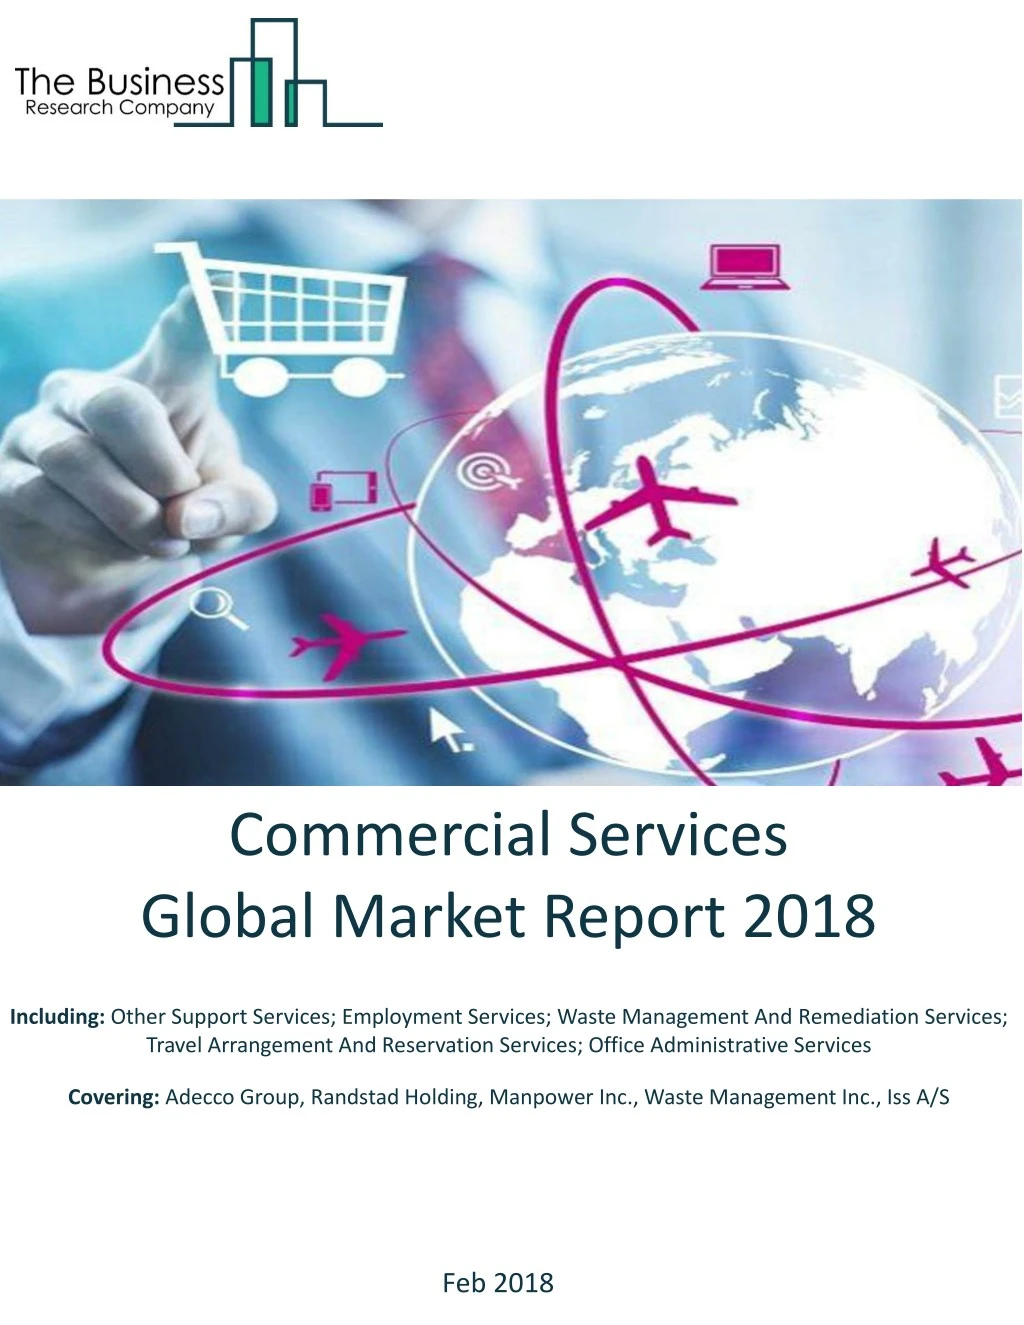 commercial services global market report 2018